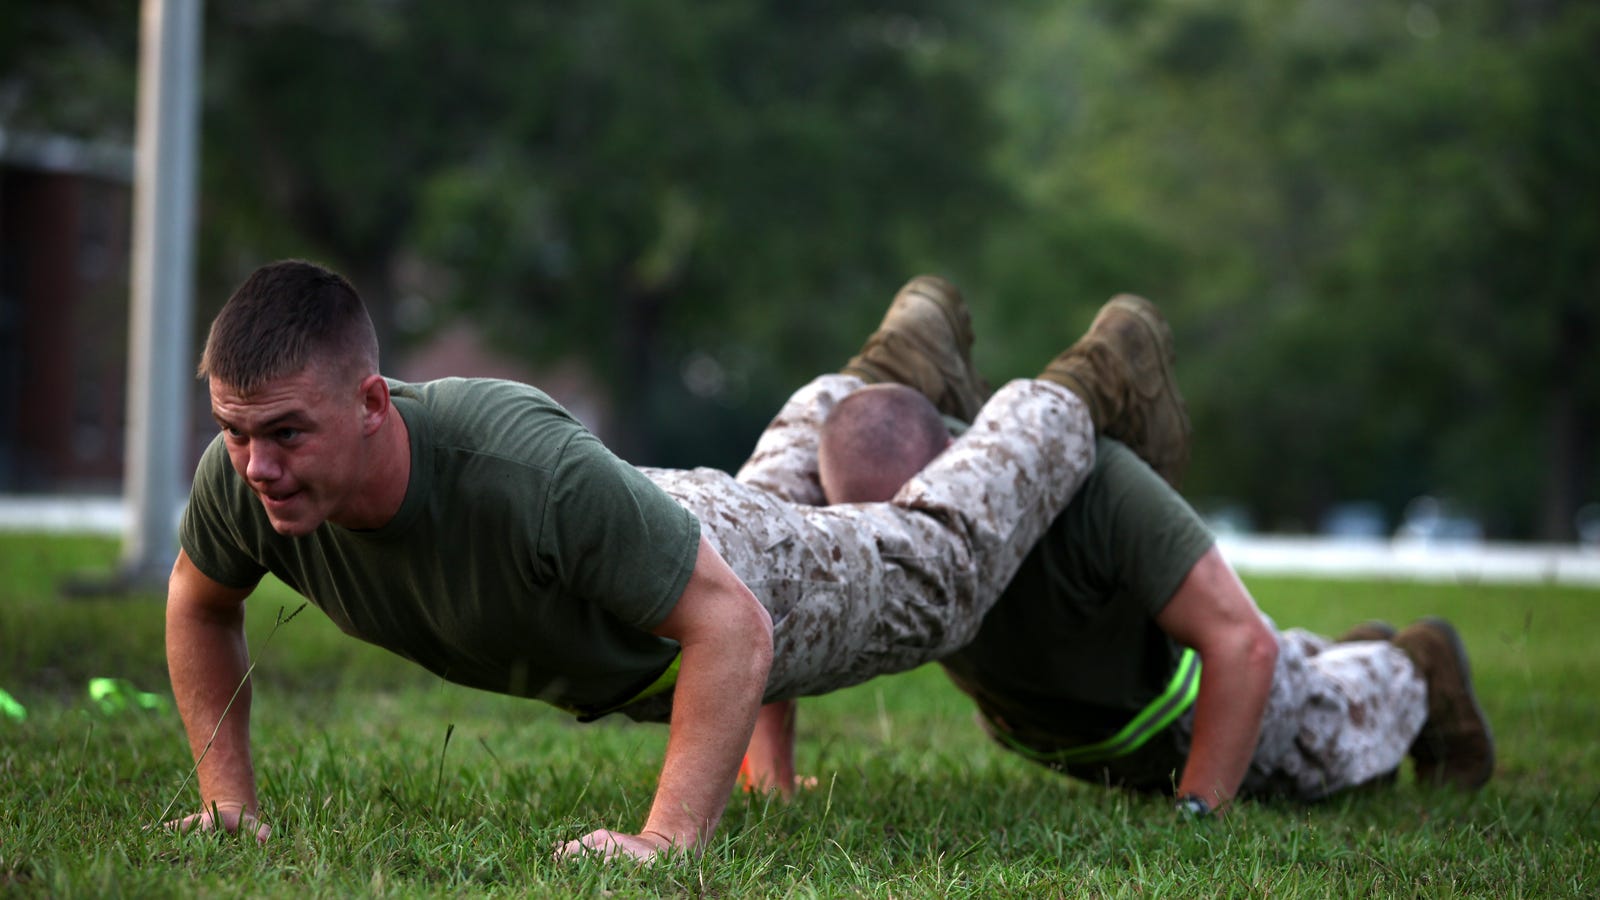 Military Physical Fitness Tests Ranked